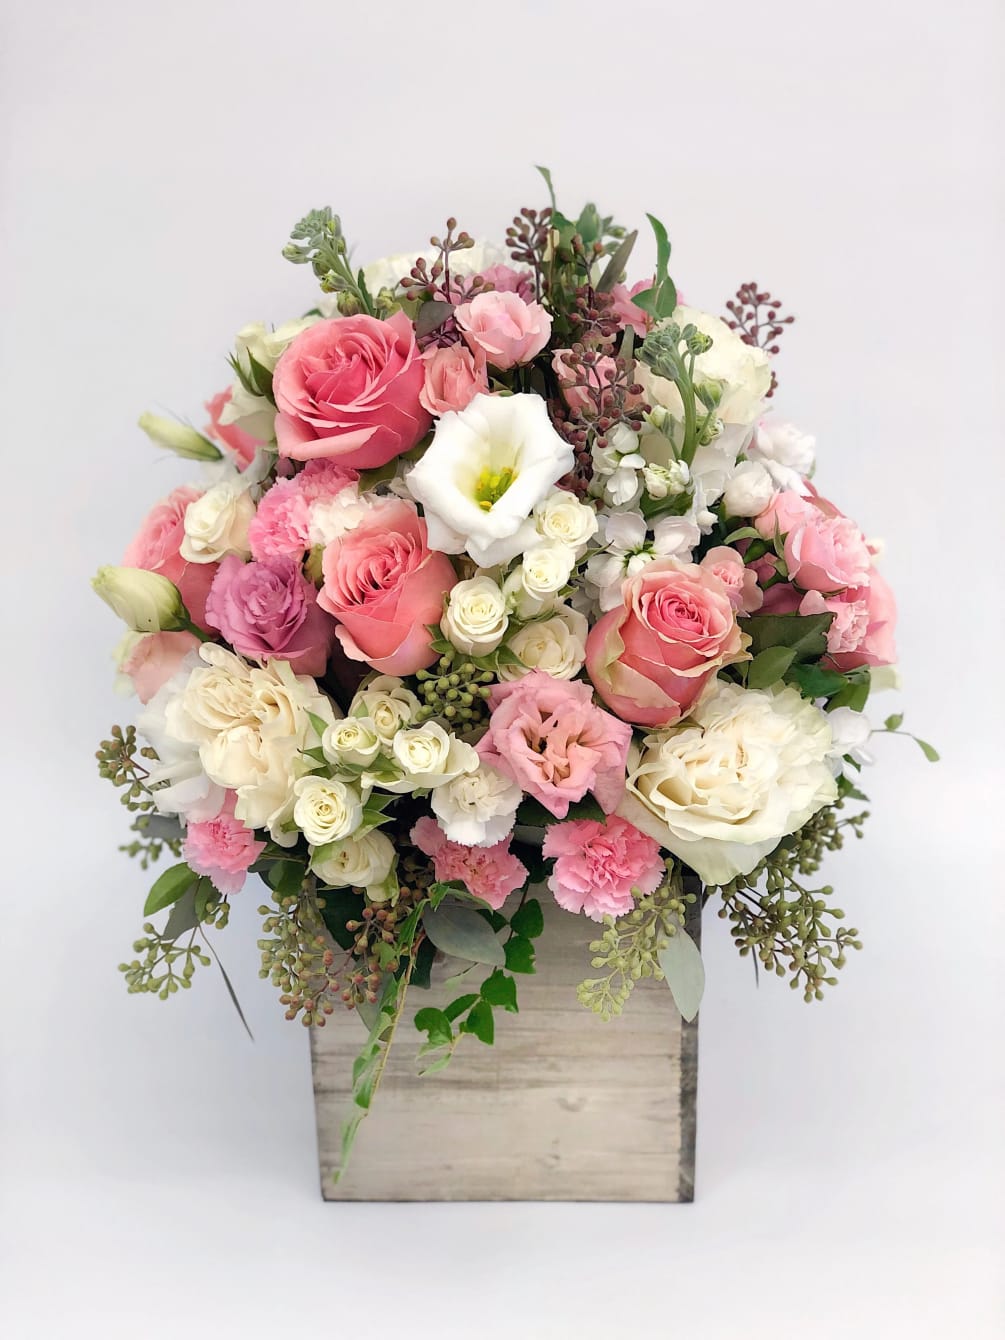 Flower box arrangement with mixed flowers in pink and white flowers.